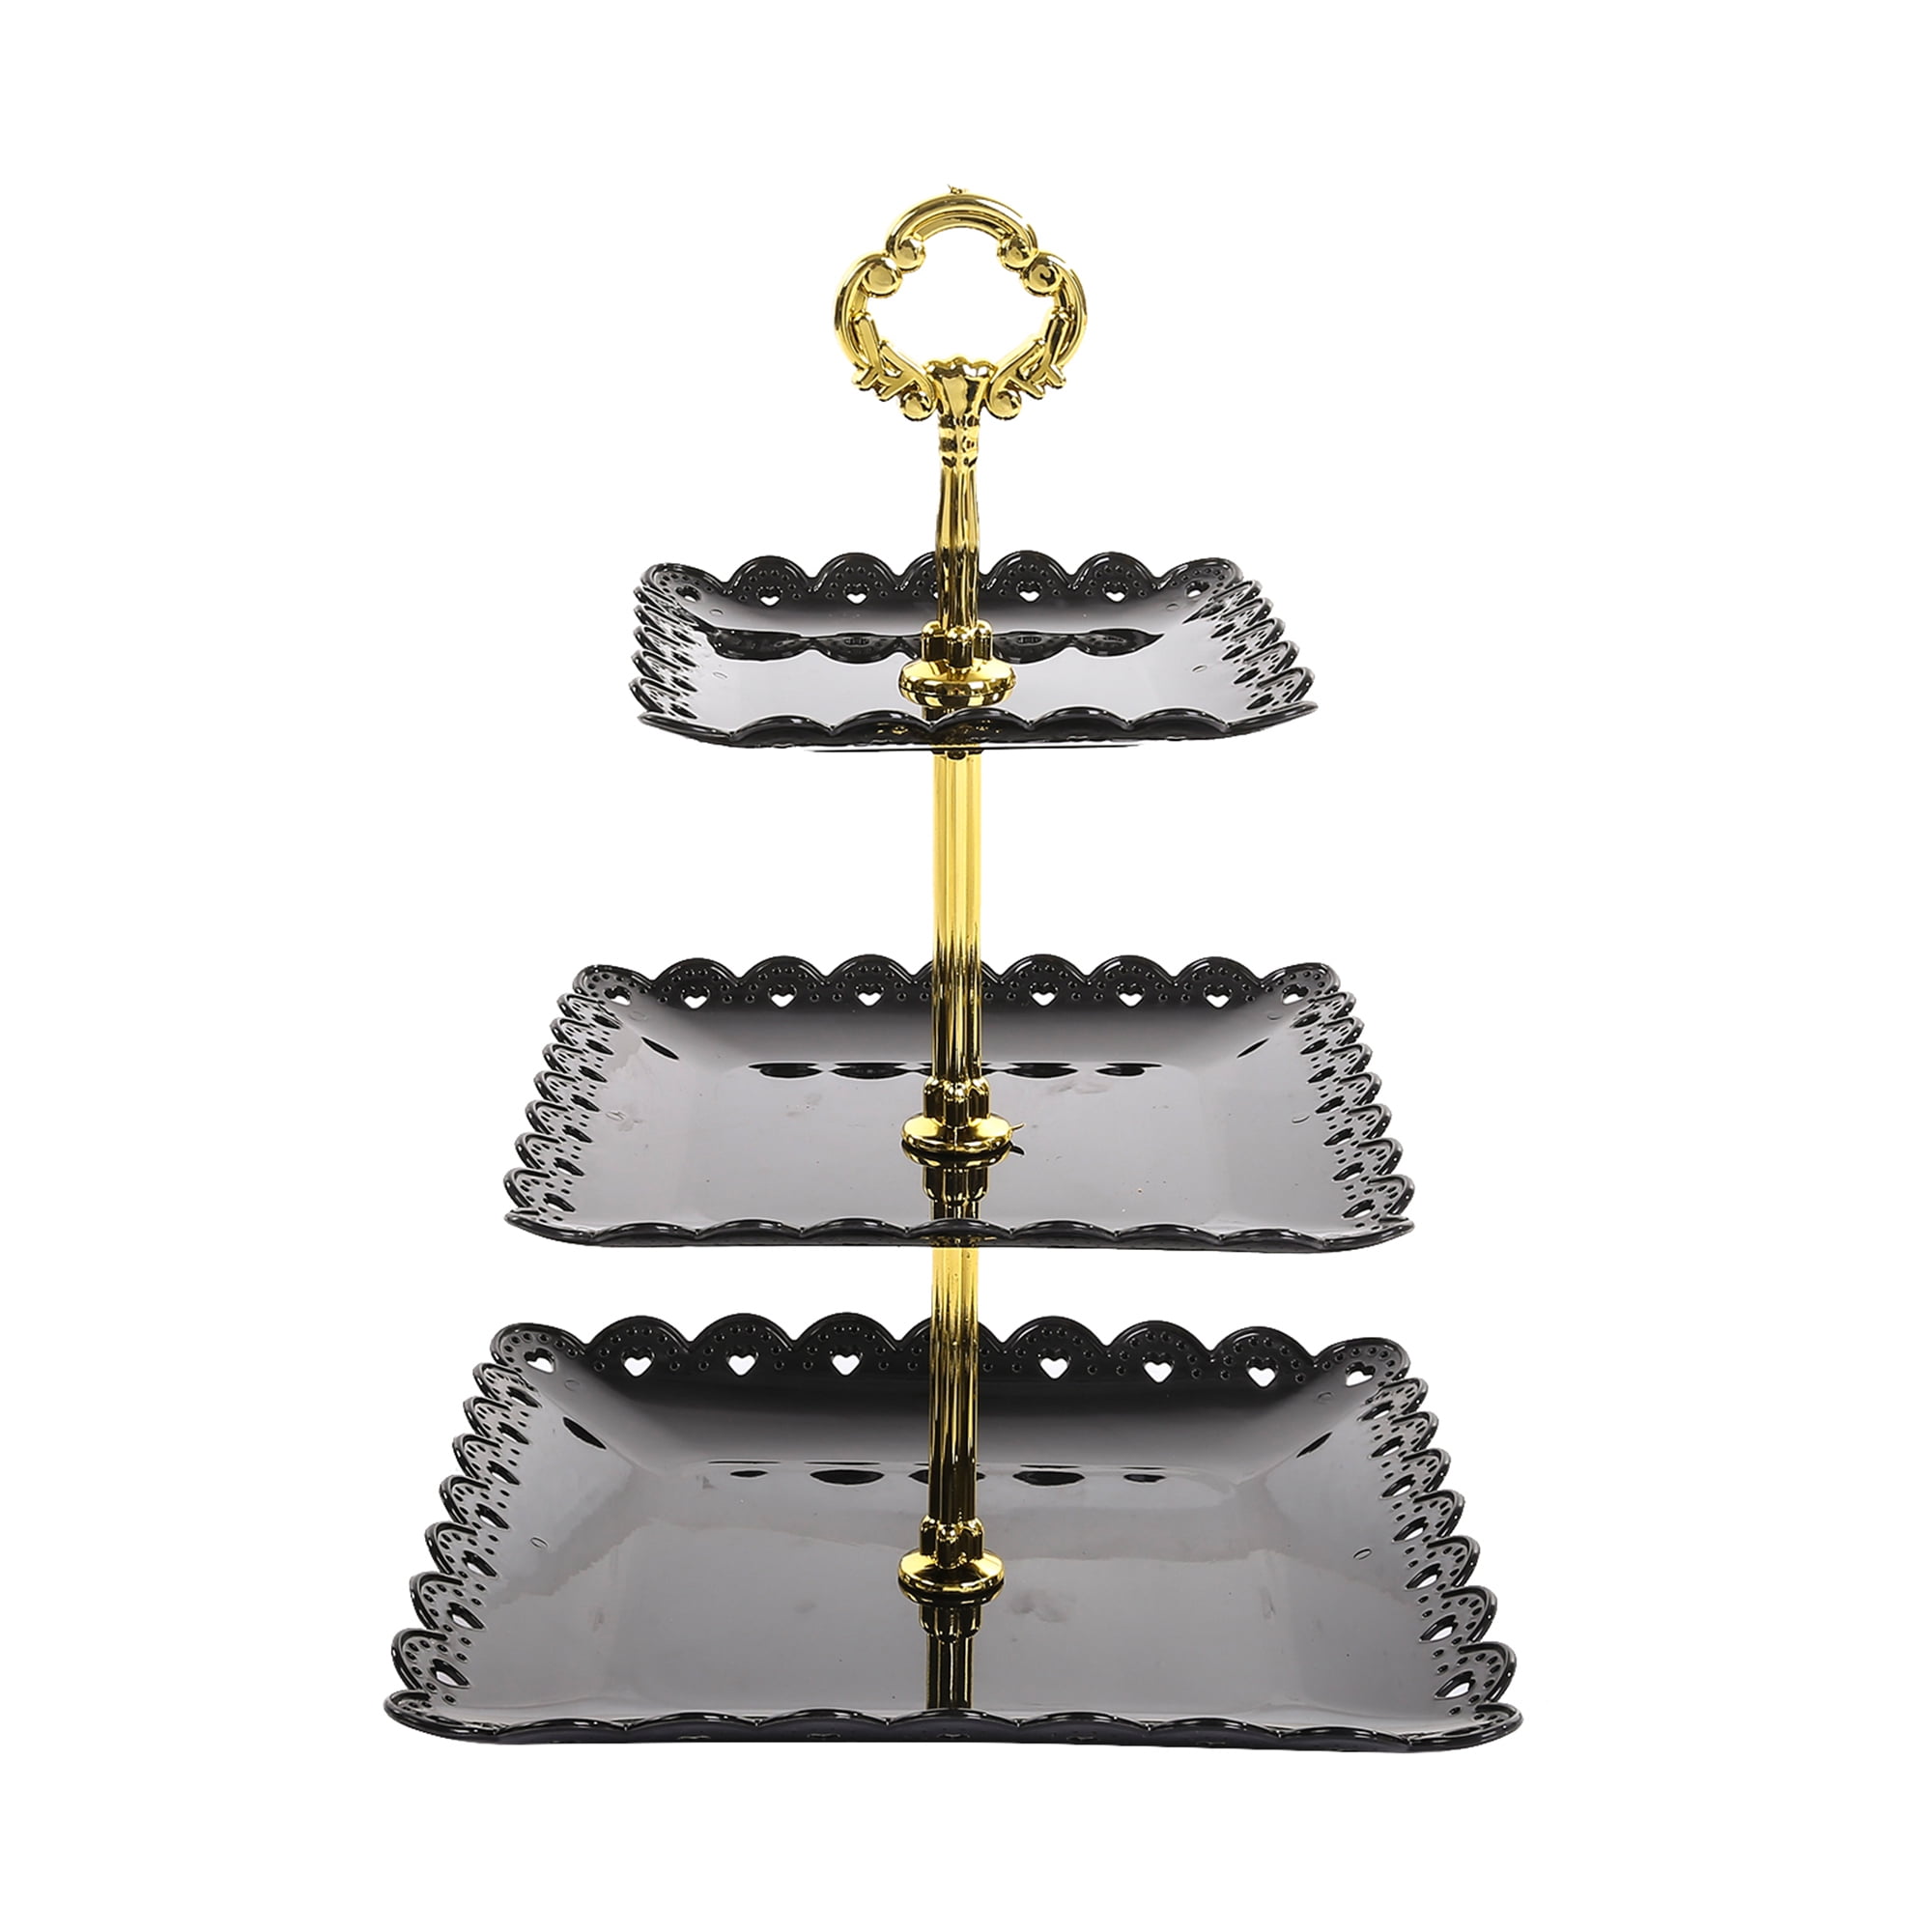 Mildsown SUNSIOM 3 -Tier Cupcake Stand, Cake Stand Tower Tray with Stand Holder, Dessert, Cookie Display Stand for Party, Wedding